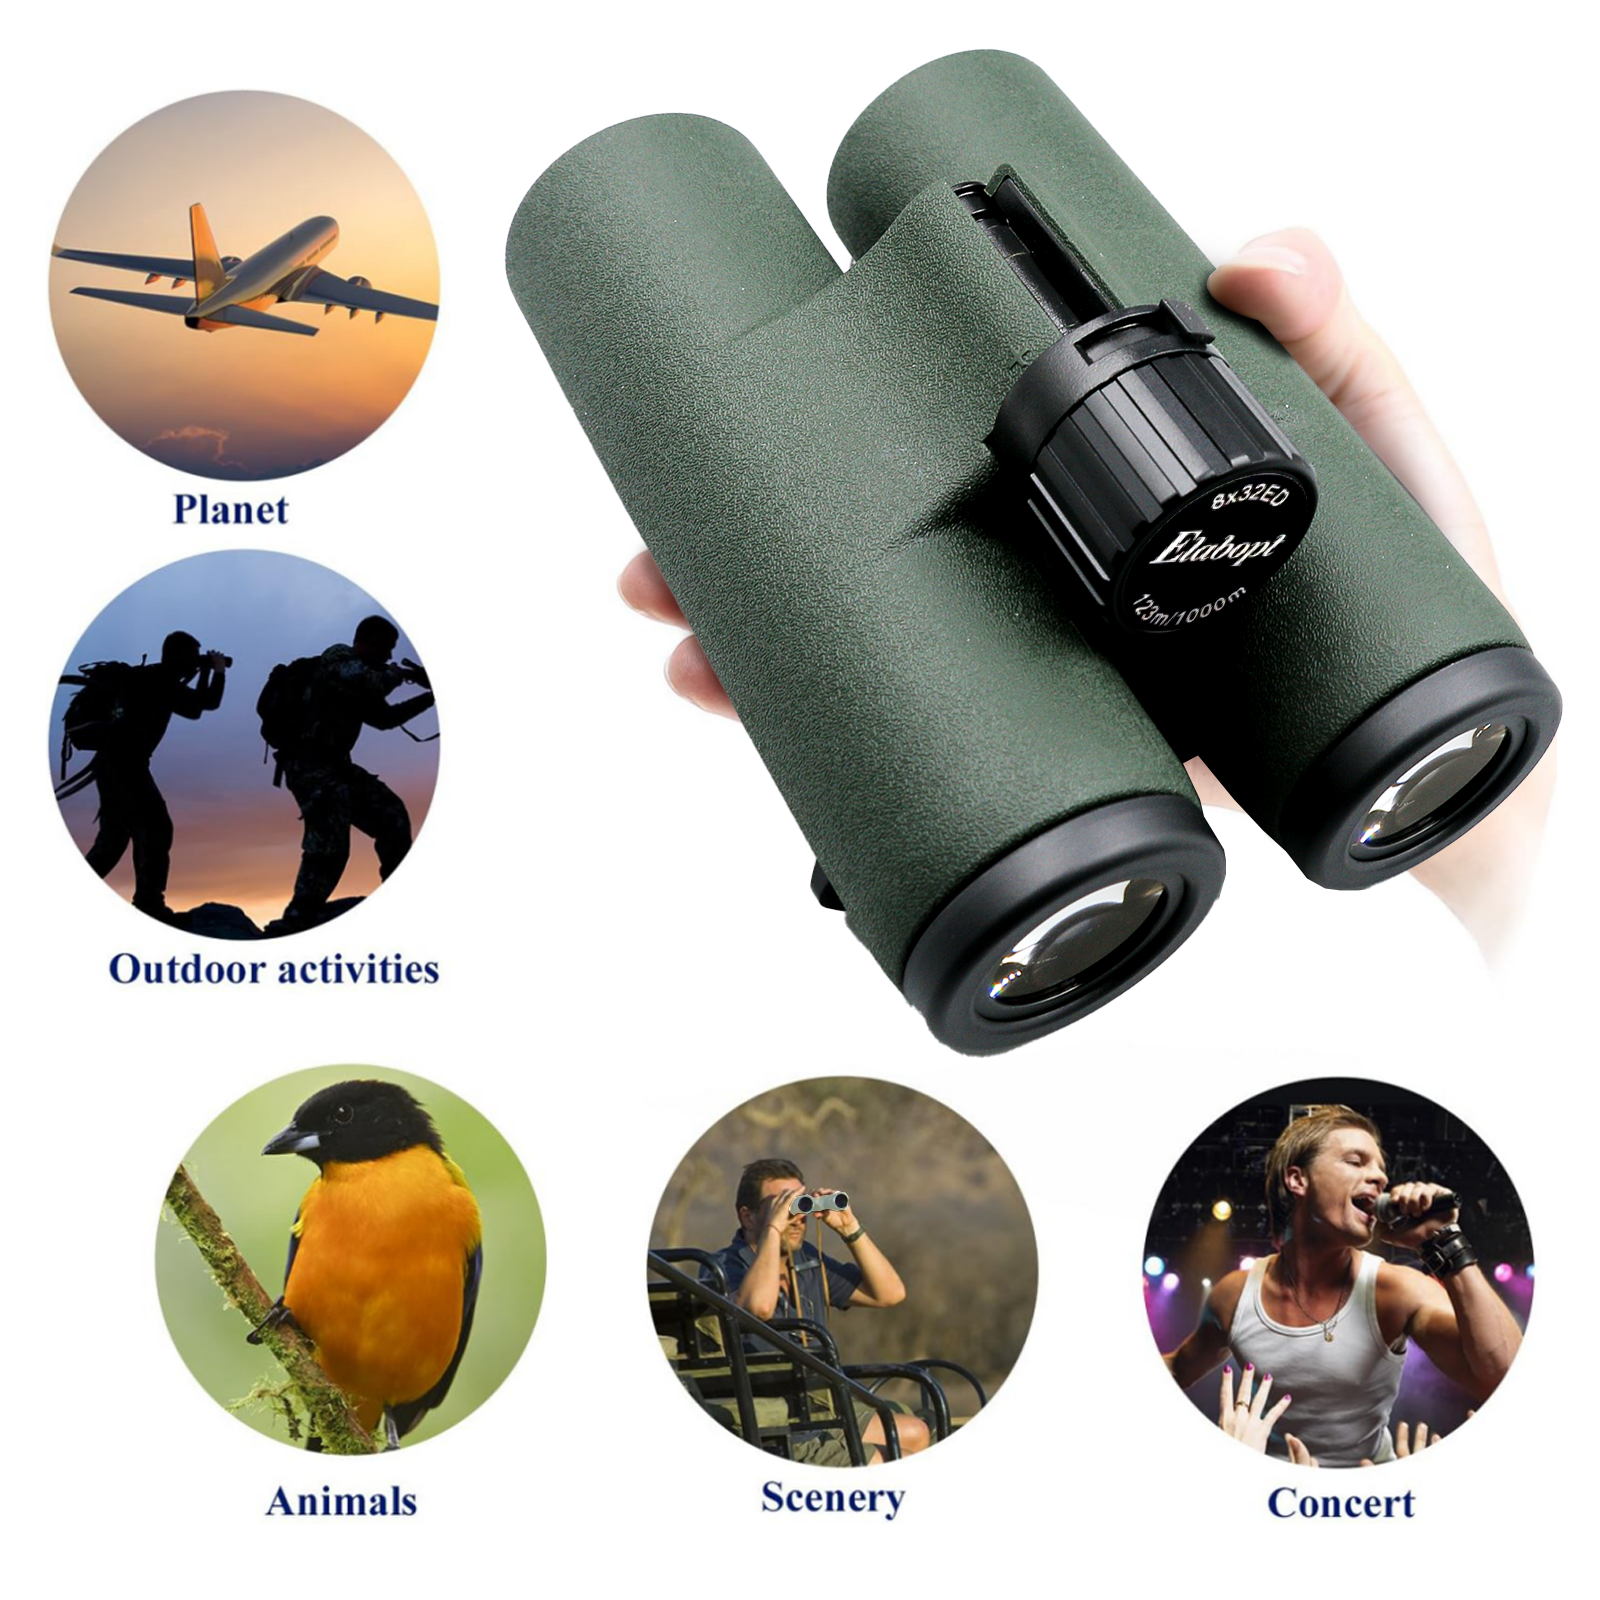 Givite 8X32ED Binoculars - Diamond White Coating with Bak4 Prisms-Waterproof Fogproof Rubber Armored for Bird Watching Hunting Outdoor Travel Theater and Concerts                                                                                             